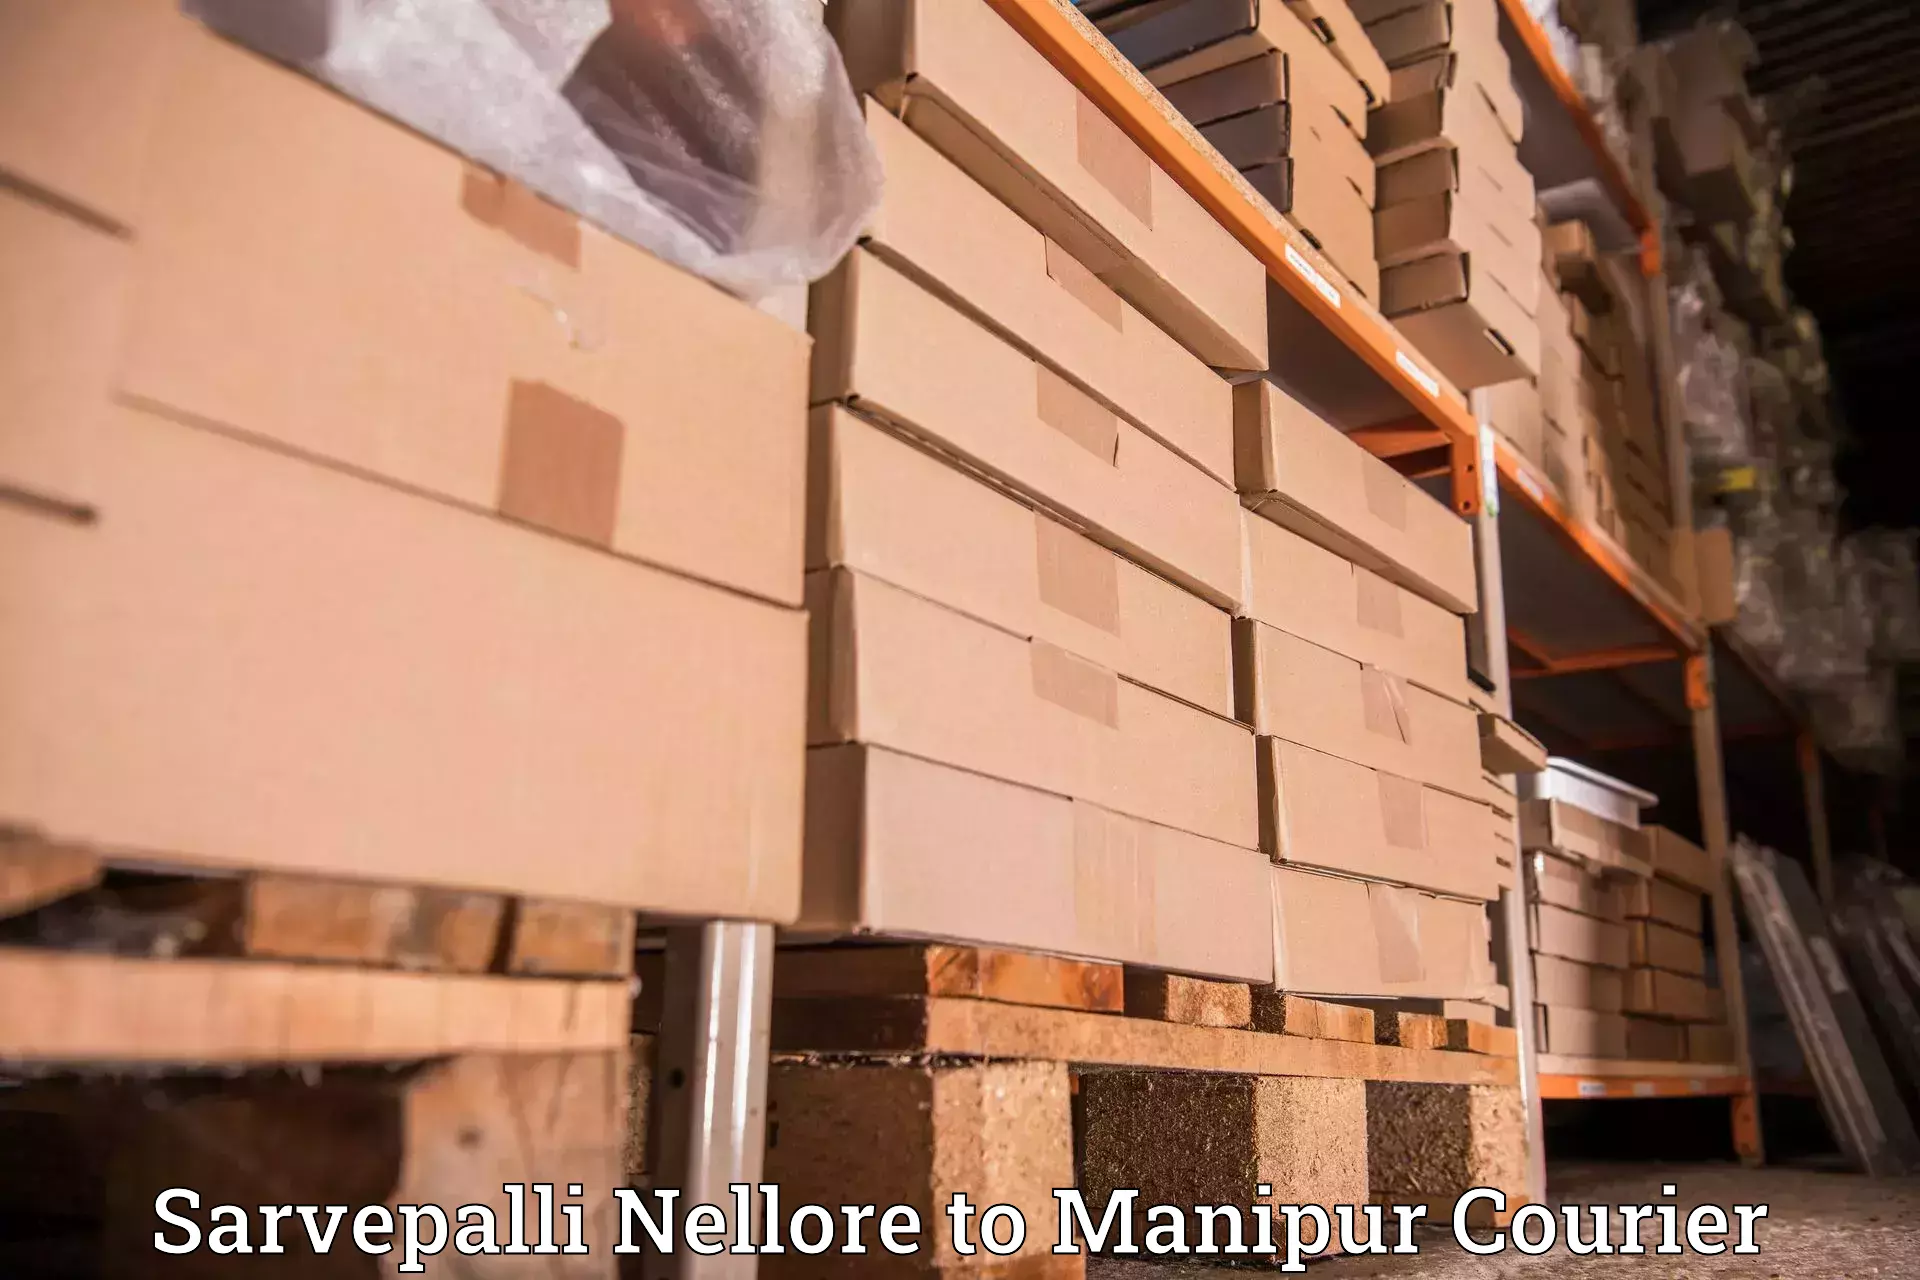 Global shipping solutions Sarvepalli Nellore to Manipur